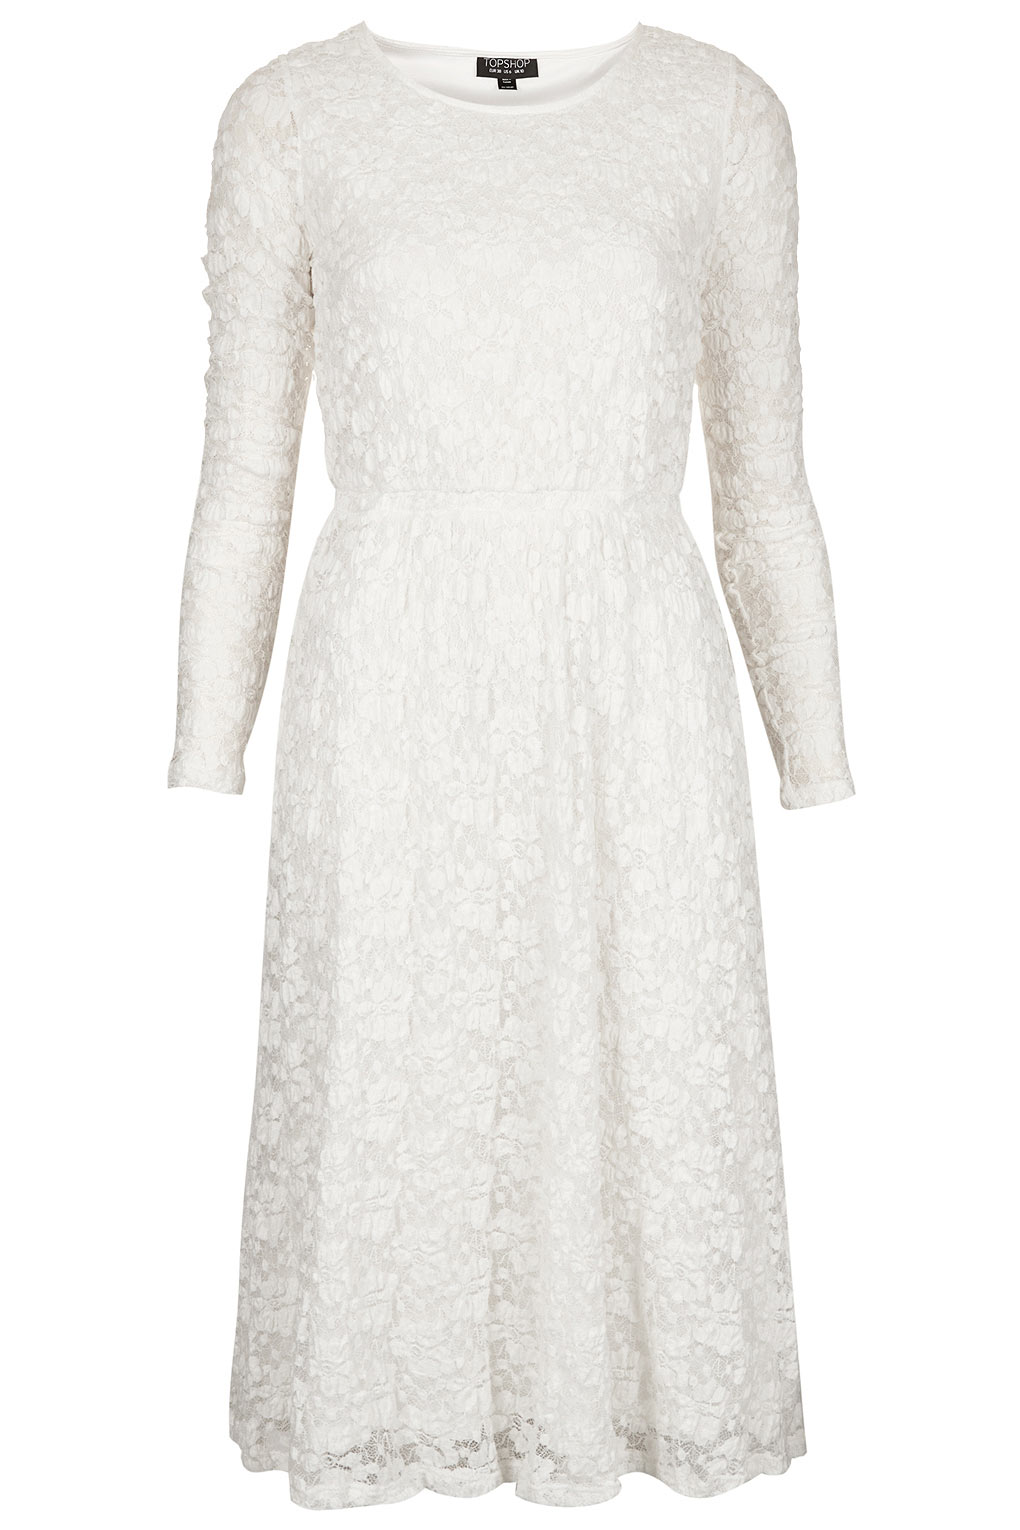 Lyst - Topshop Lace Midi Dress in White